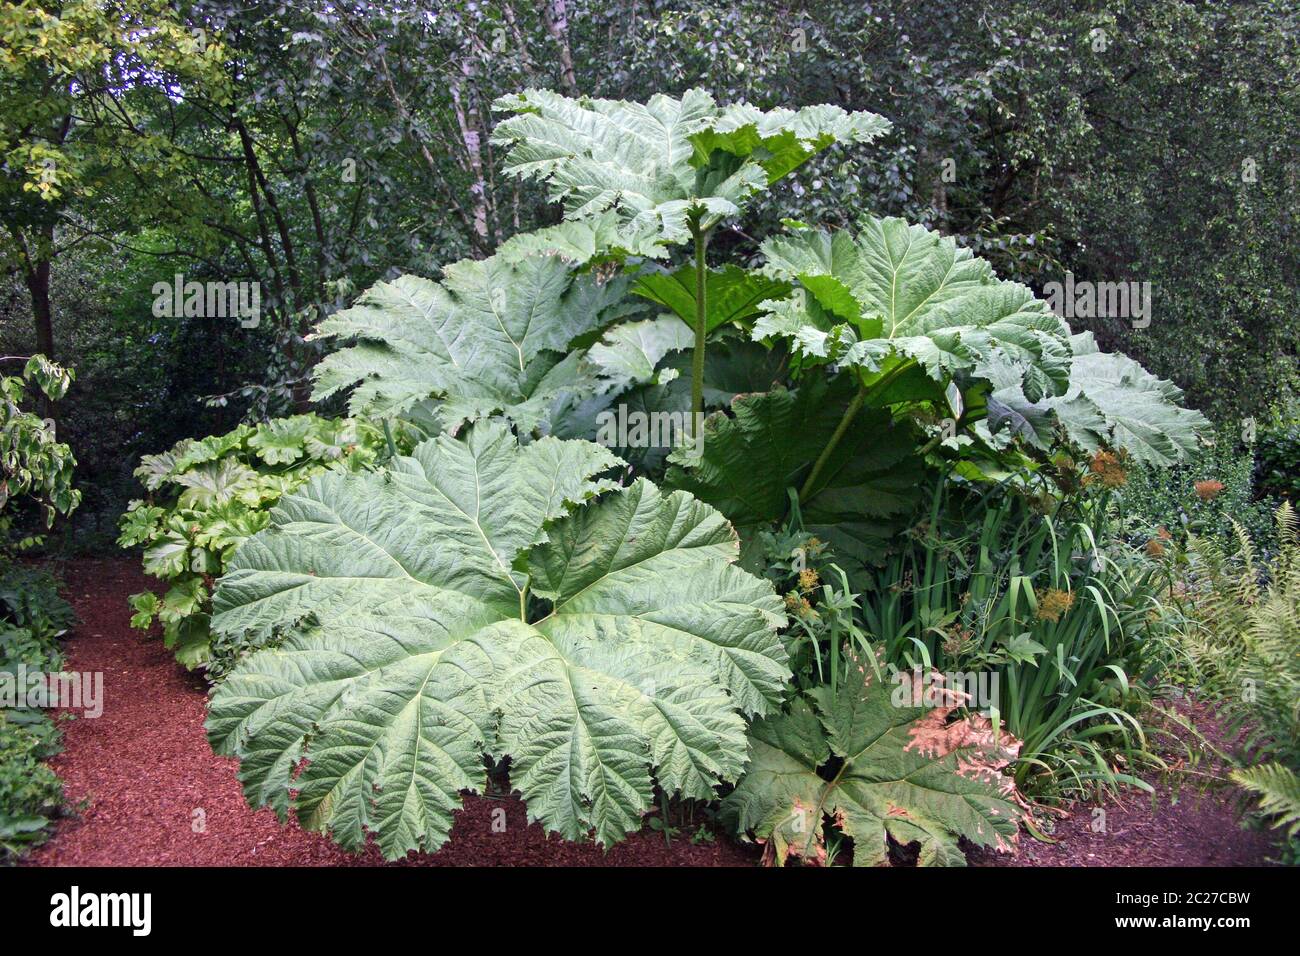 Large leaves of a Gunnera plant in a garden with a background of trees and other vegetation with an adjacent path. Stock Photo